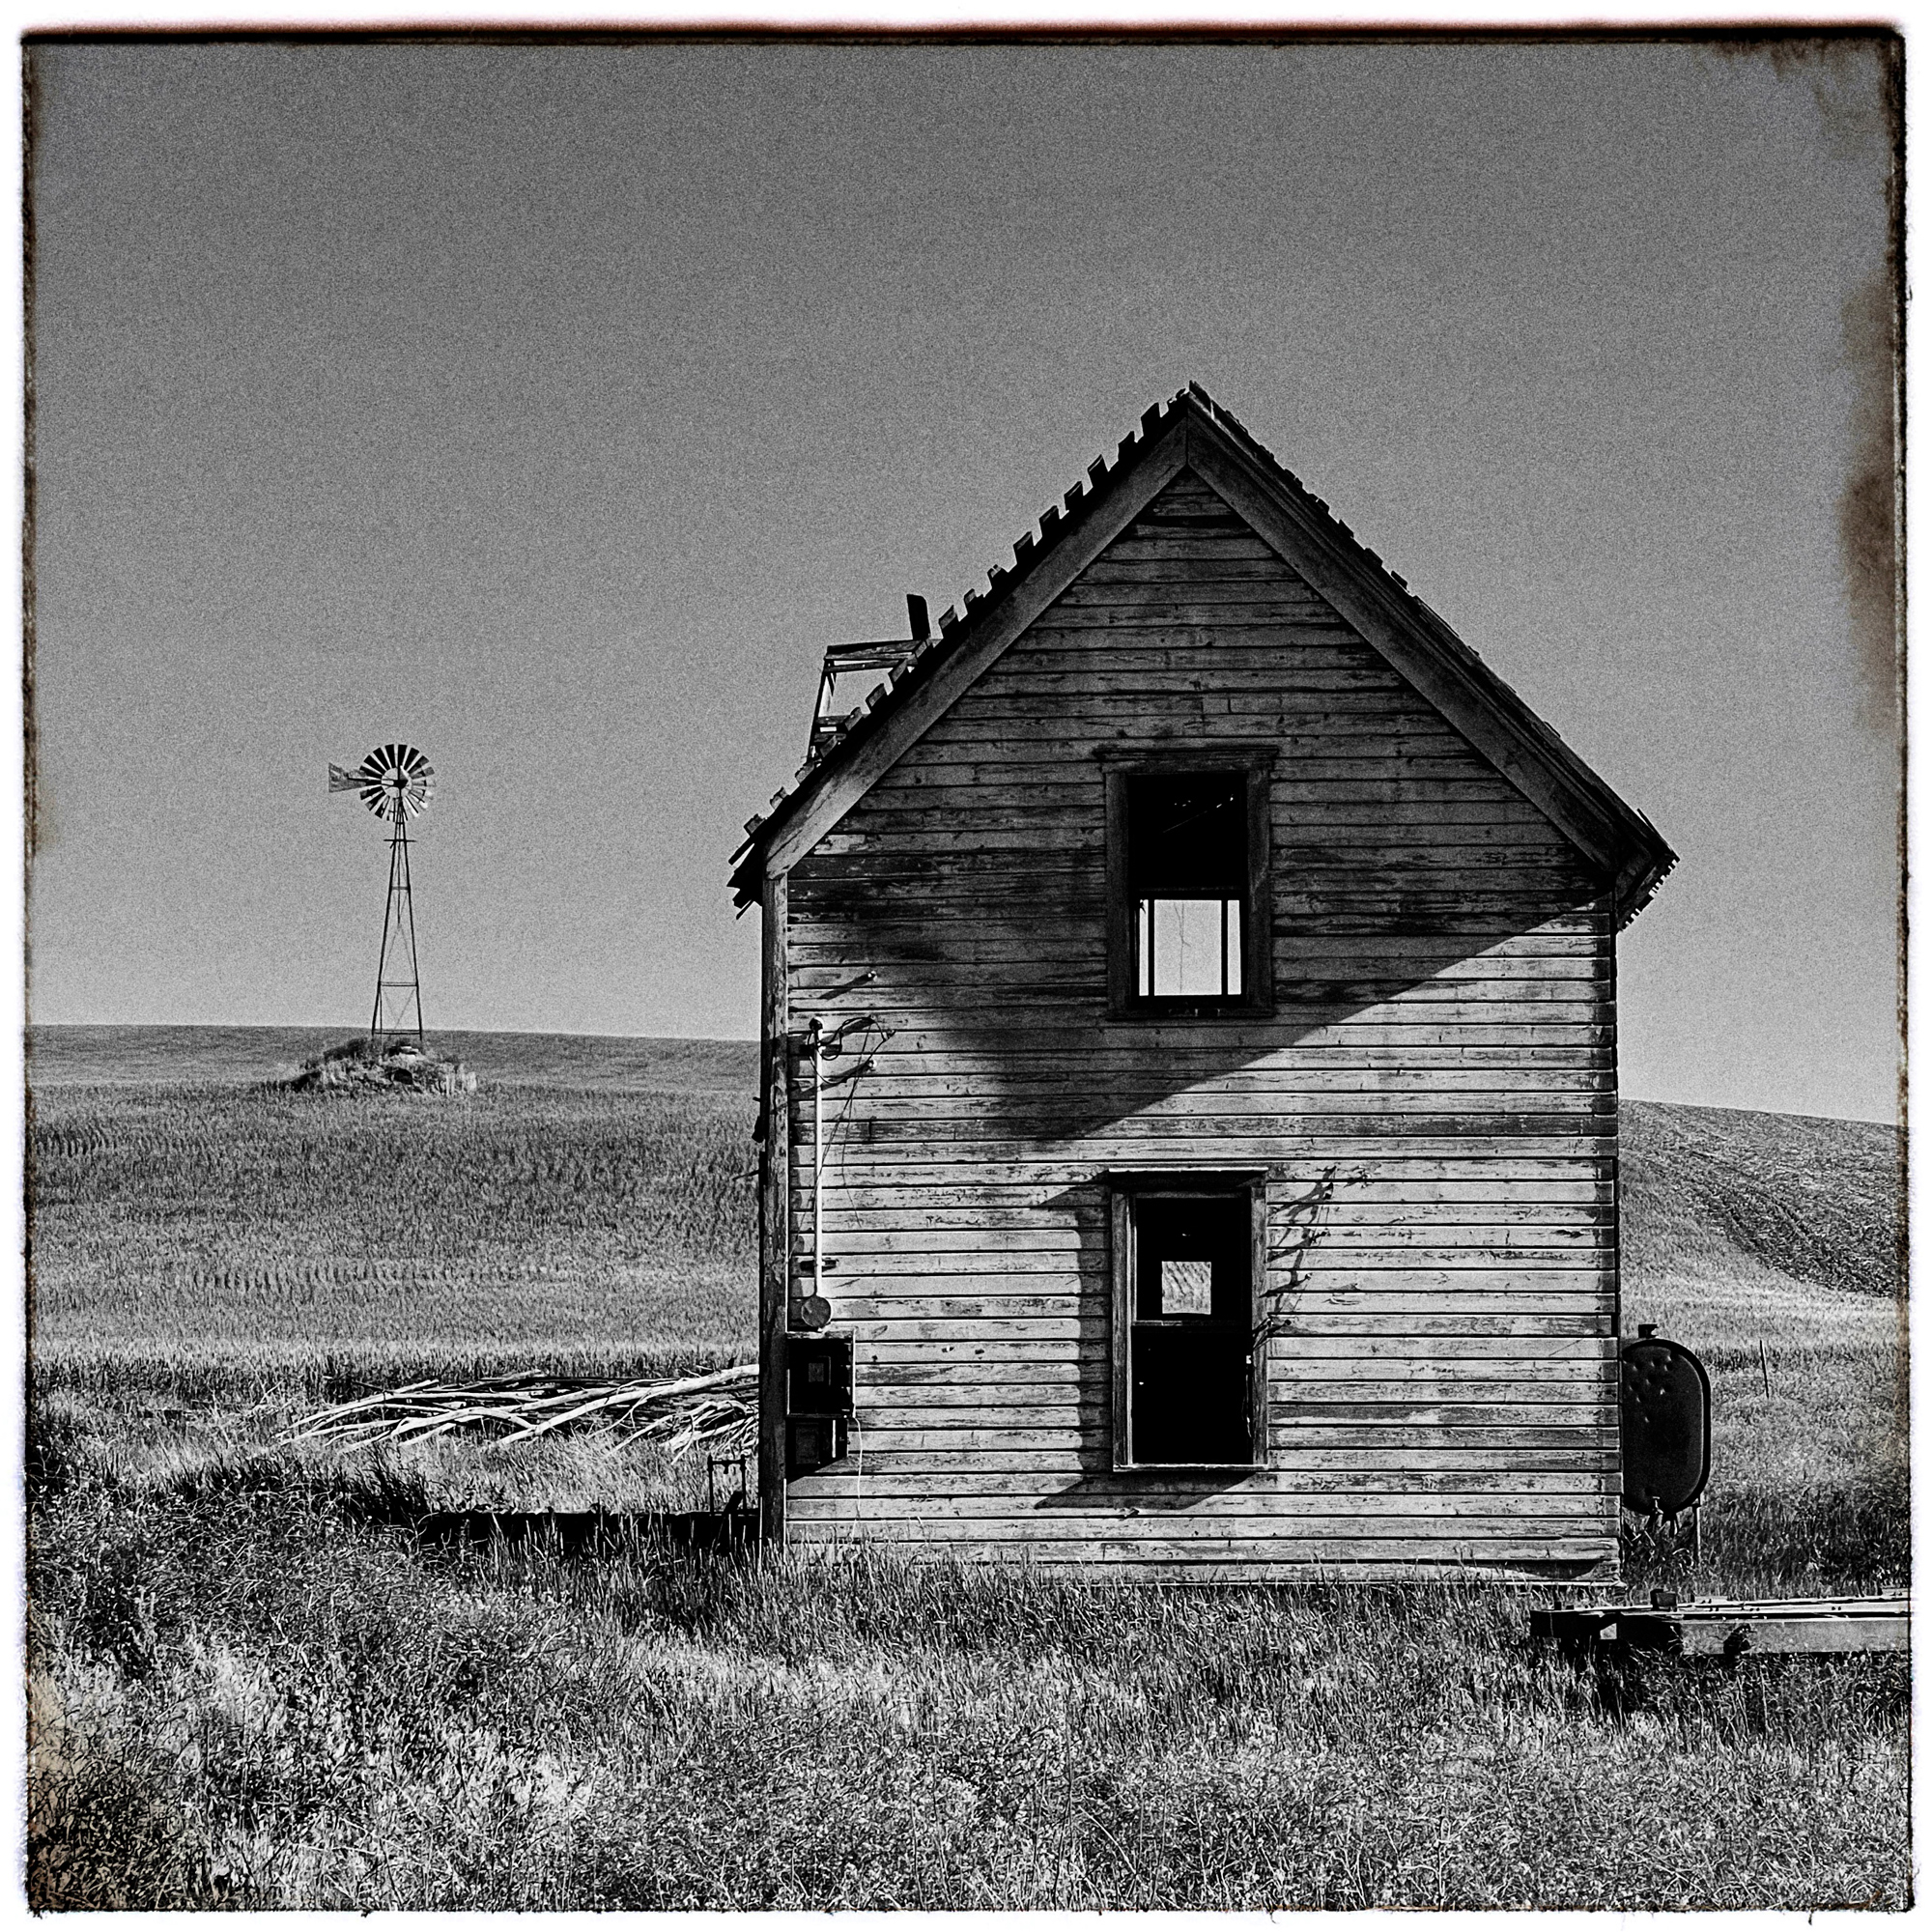 Another abandoned house and windmill